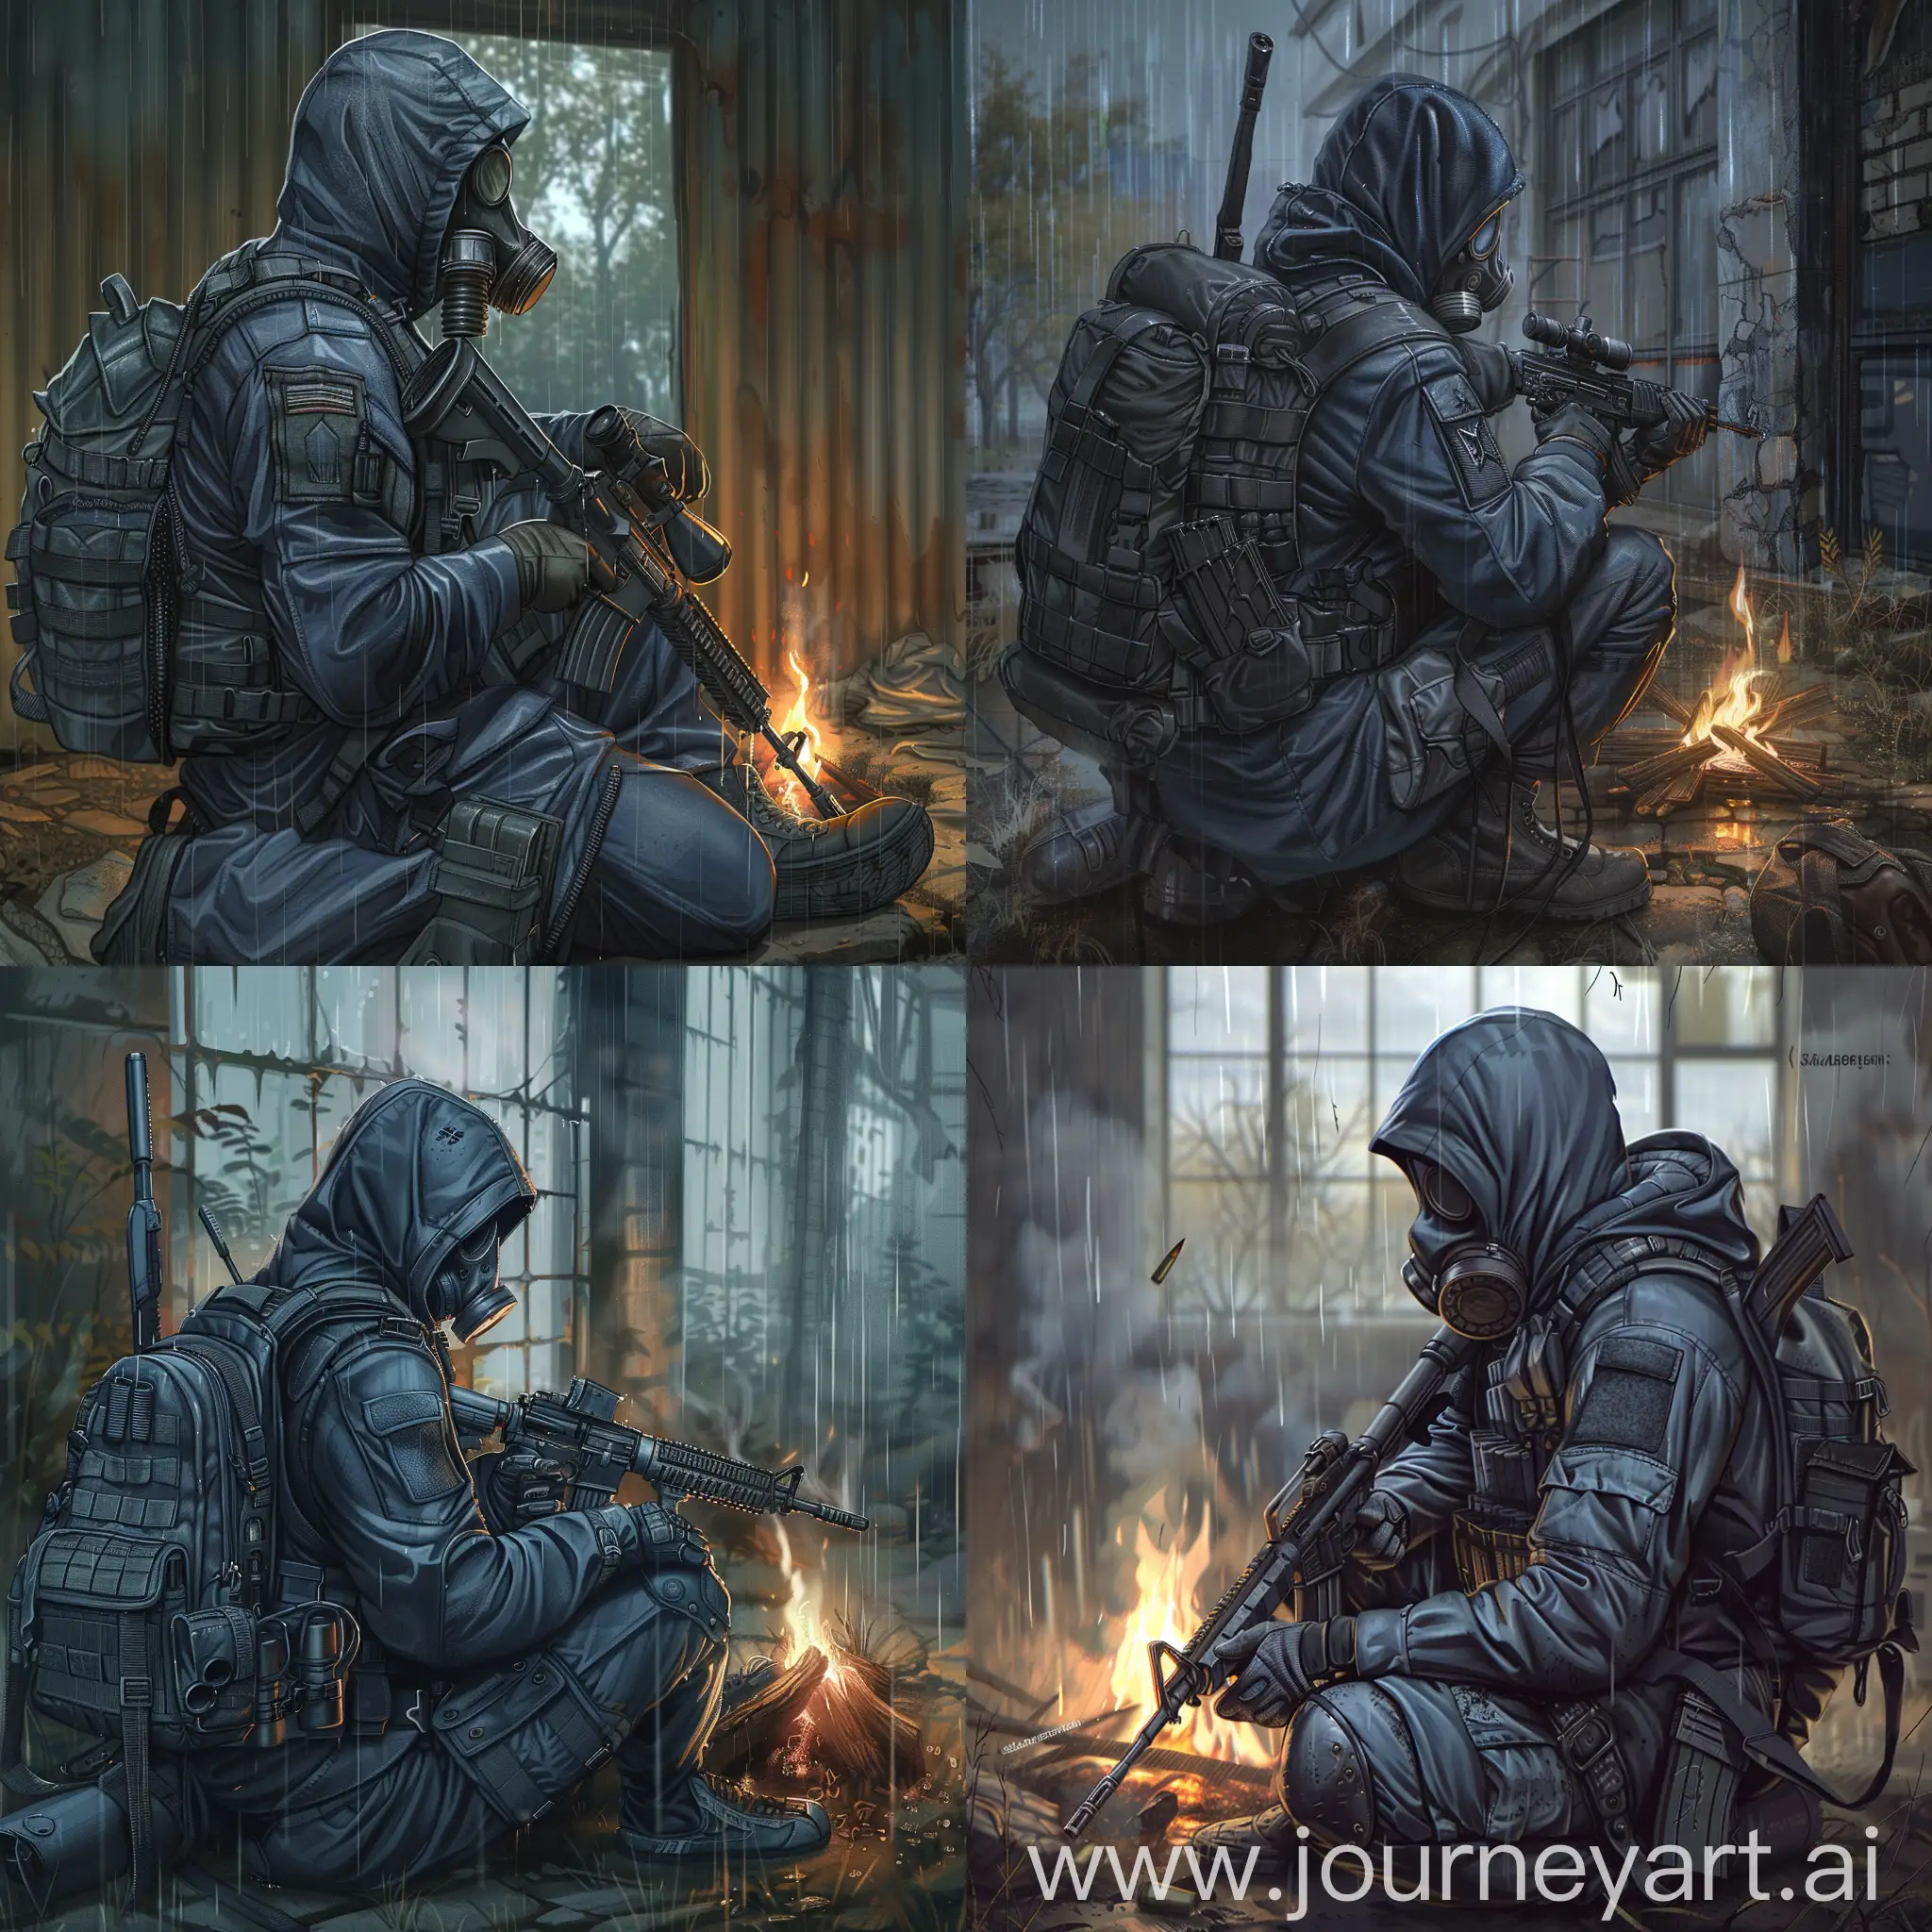 Digital art is a lone mercenary from the universe of S.T.A.L.K.E.R., dressed in a dark blue military raincoat, gray military armor on his body, a gasmask on his face, a military backpack on his back, a rifle in his hands, he sitting by the campfire inside abandoned soviet bilding, radiation rain, gloomy autumn, evening.